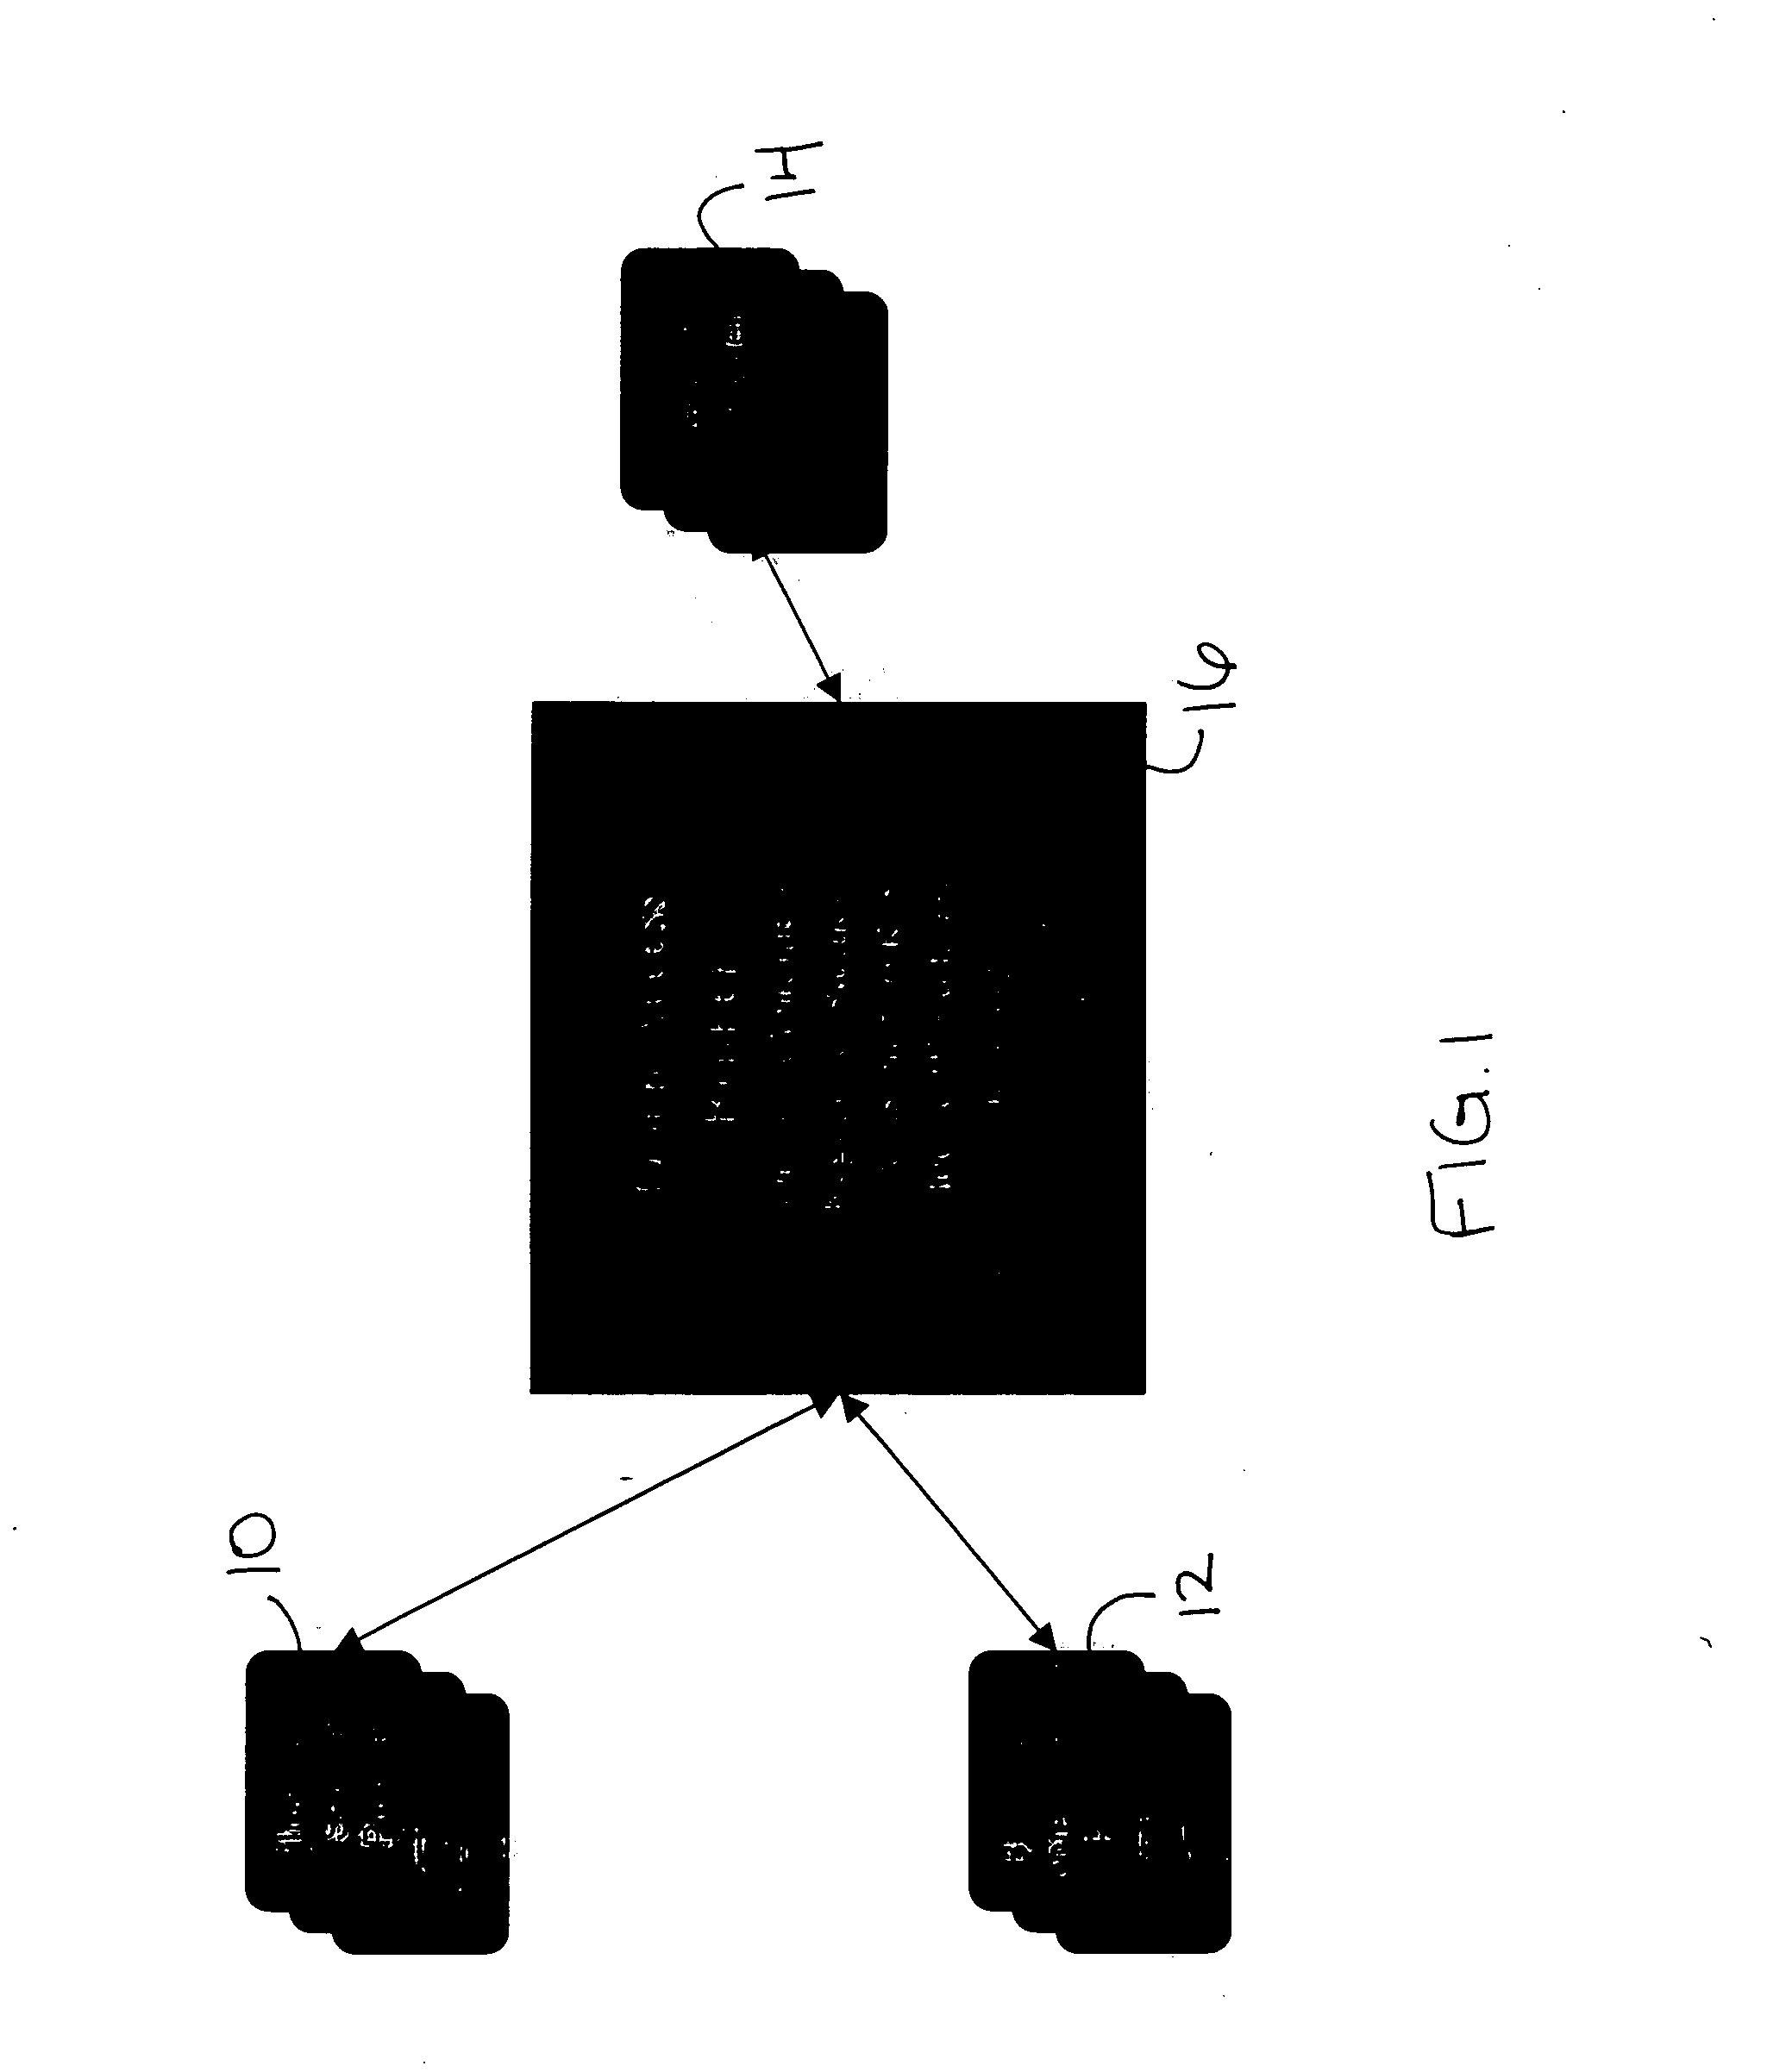 System and method for providing access to network services